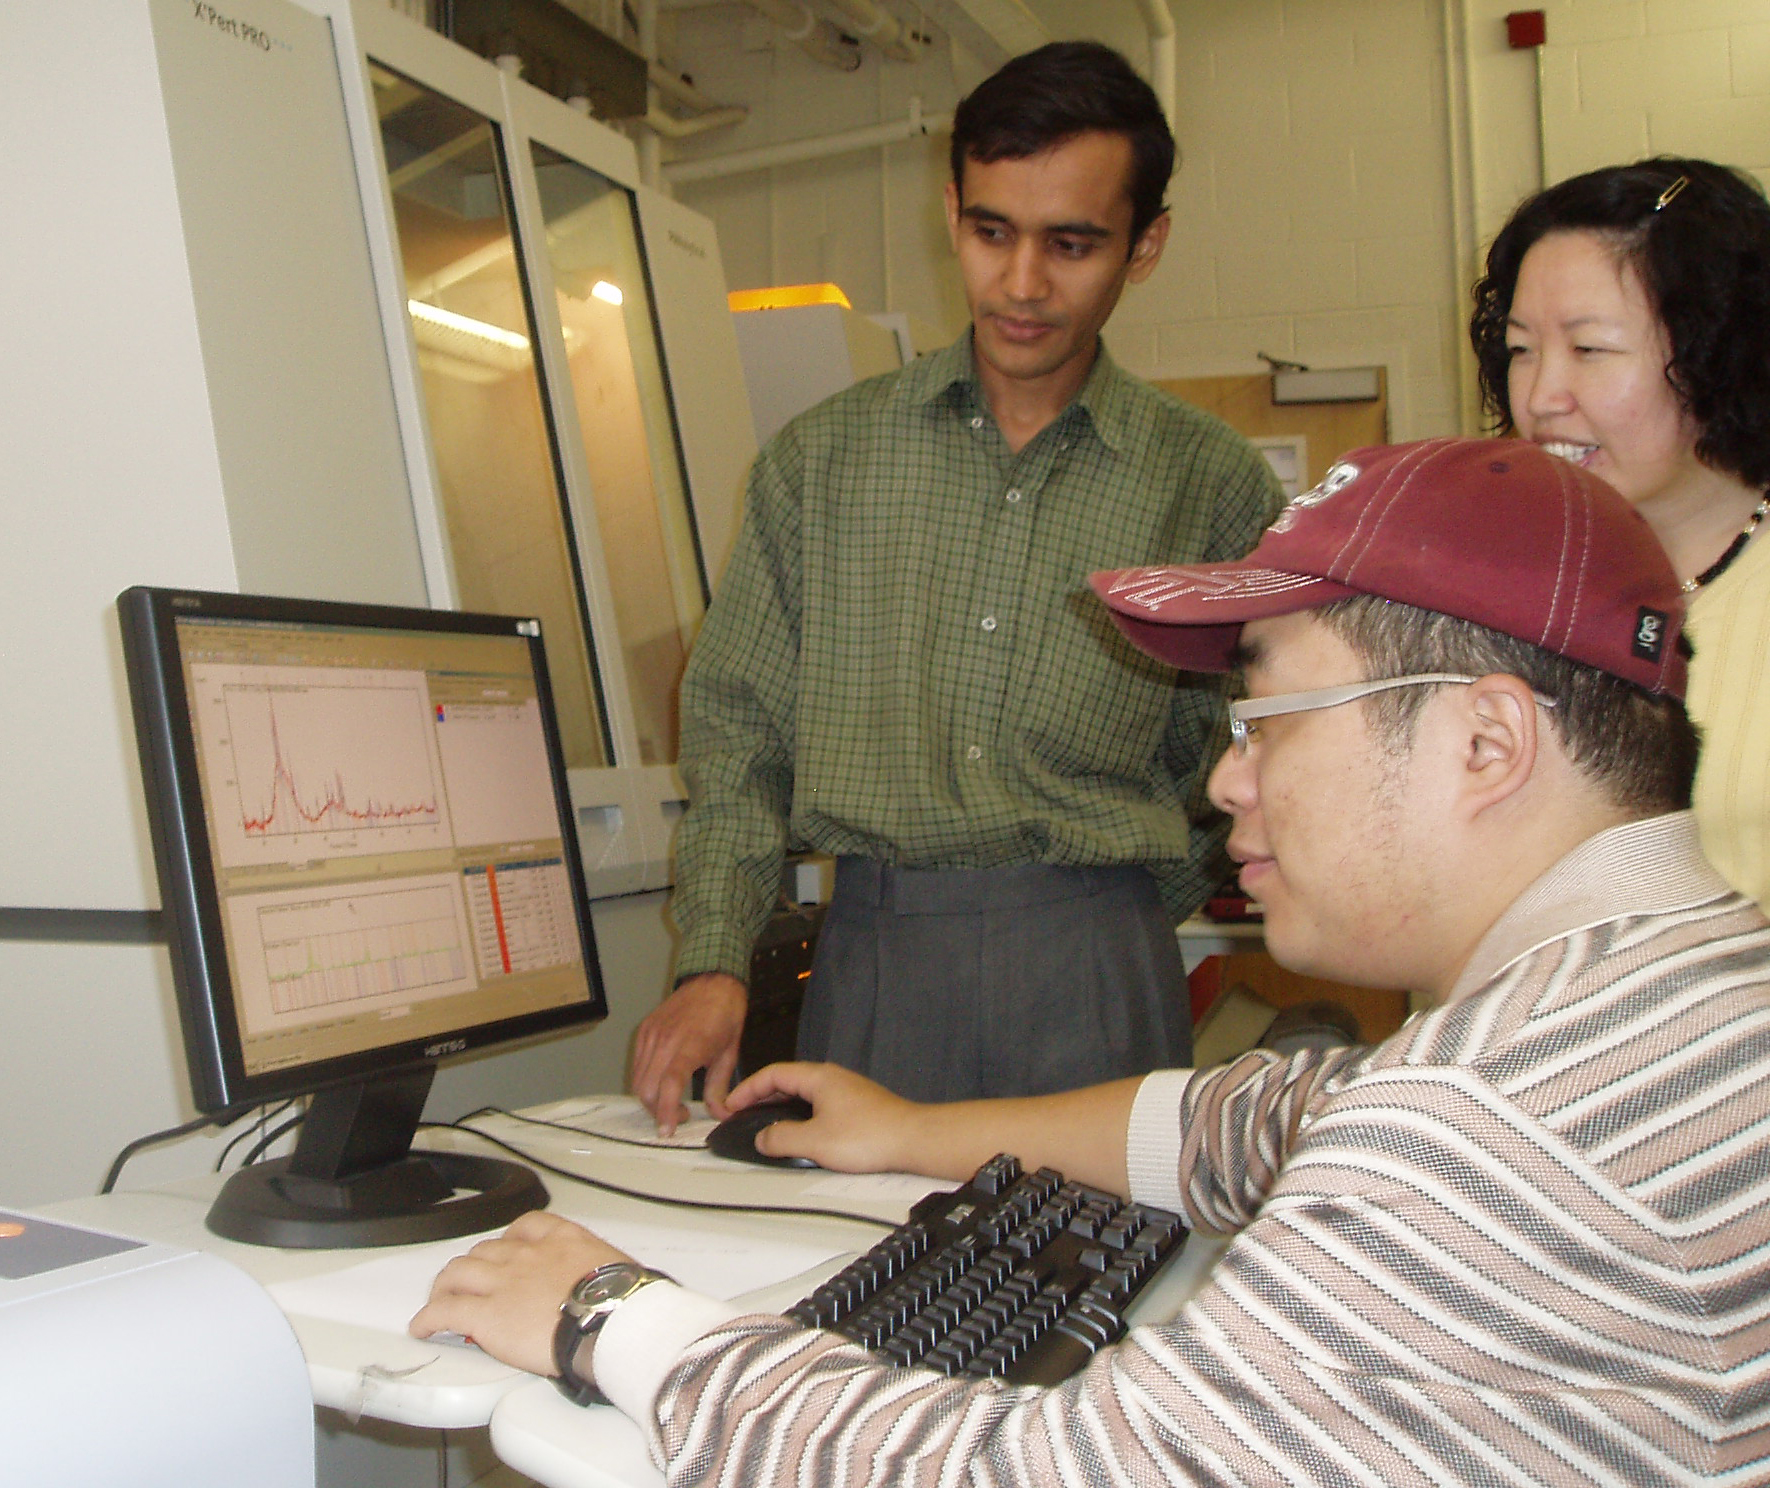 Materials science and engineering doctoral student Manoj Mahapatra, of Egra, Purba Medinipur, India; and Assistant Professor Kathy Lu, standing; and materials science and engineering doctoral student Tongan Jin, of Zhangjiakou, China, seated; are analyzing the seal glass to see the resistance to devitrification (crystalline growth) of the material.